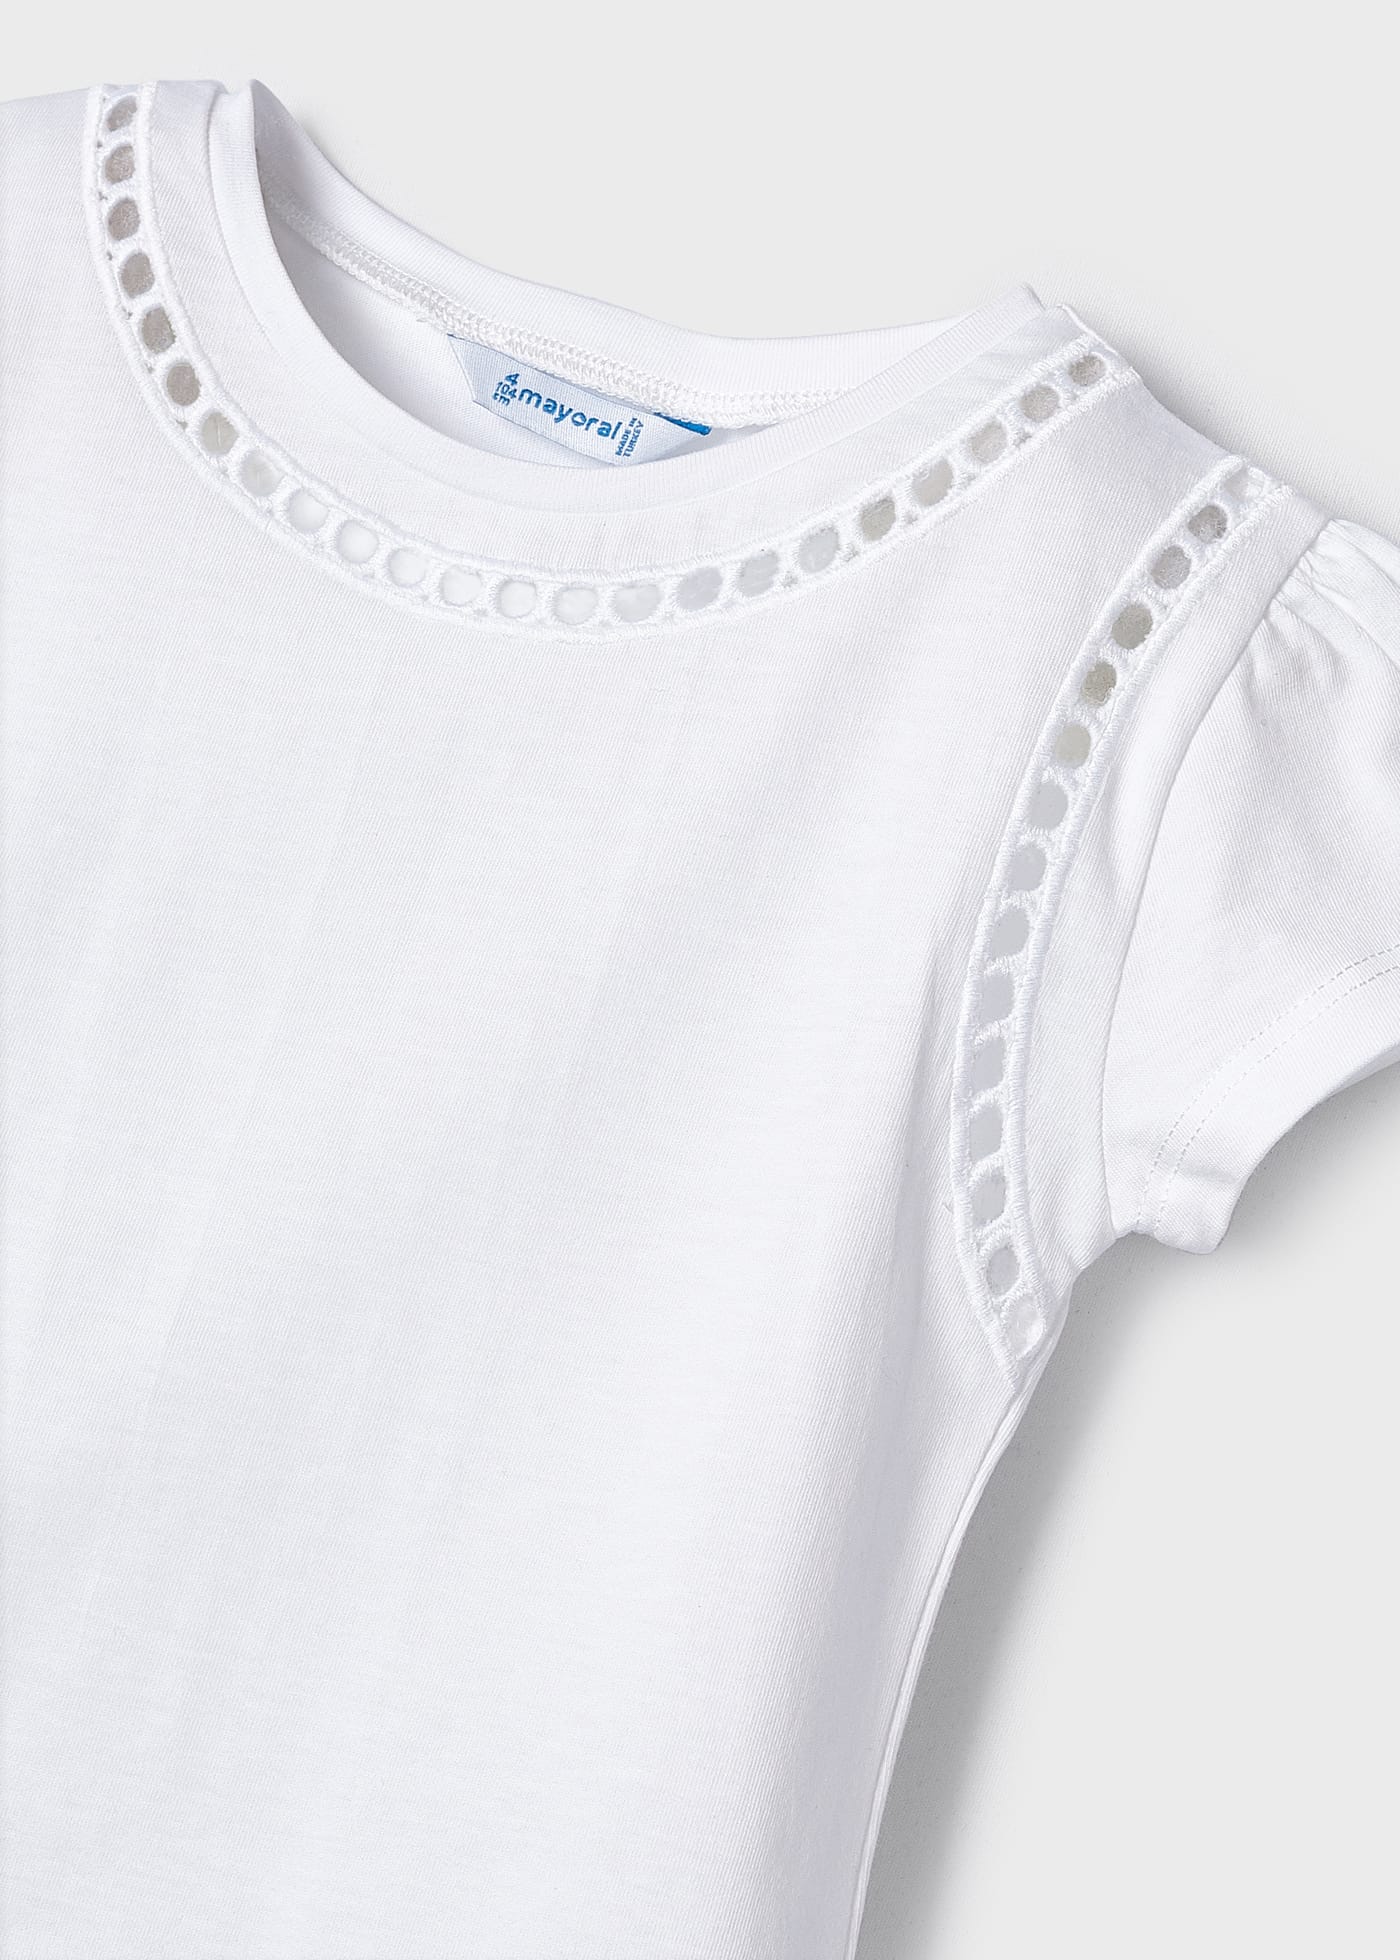 Mayoral Mini T-Shirt w/Embroidery Details _White 3057-17